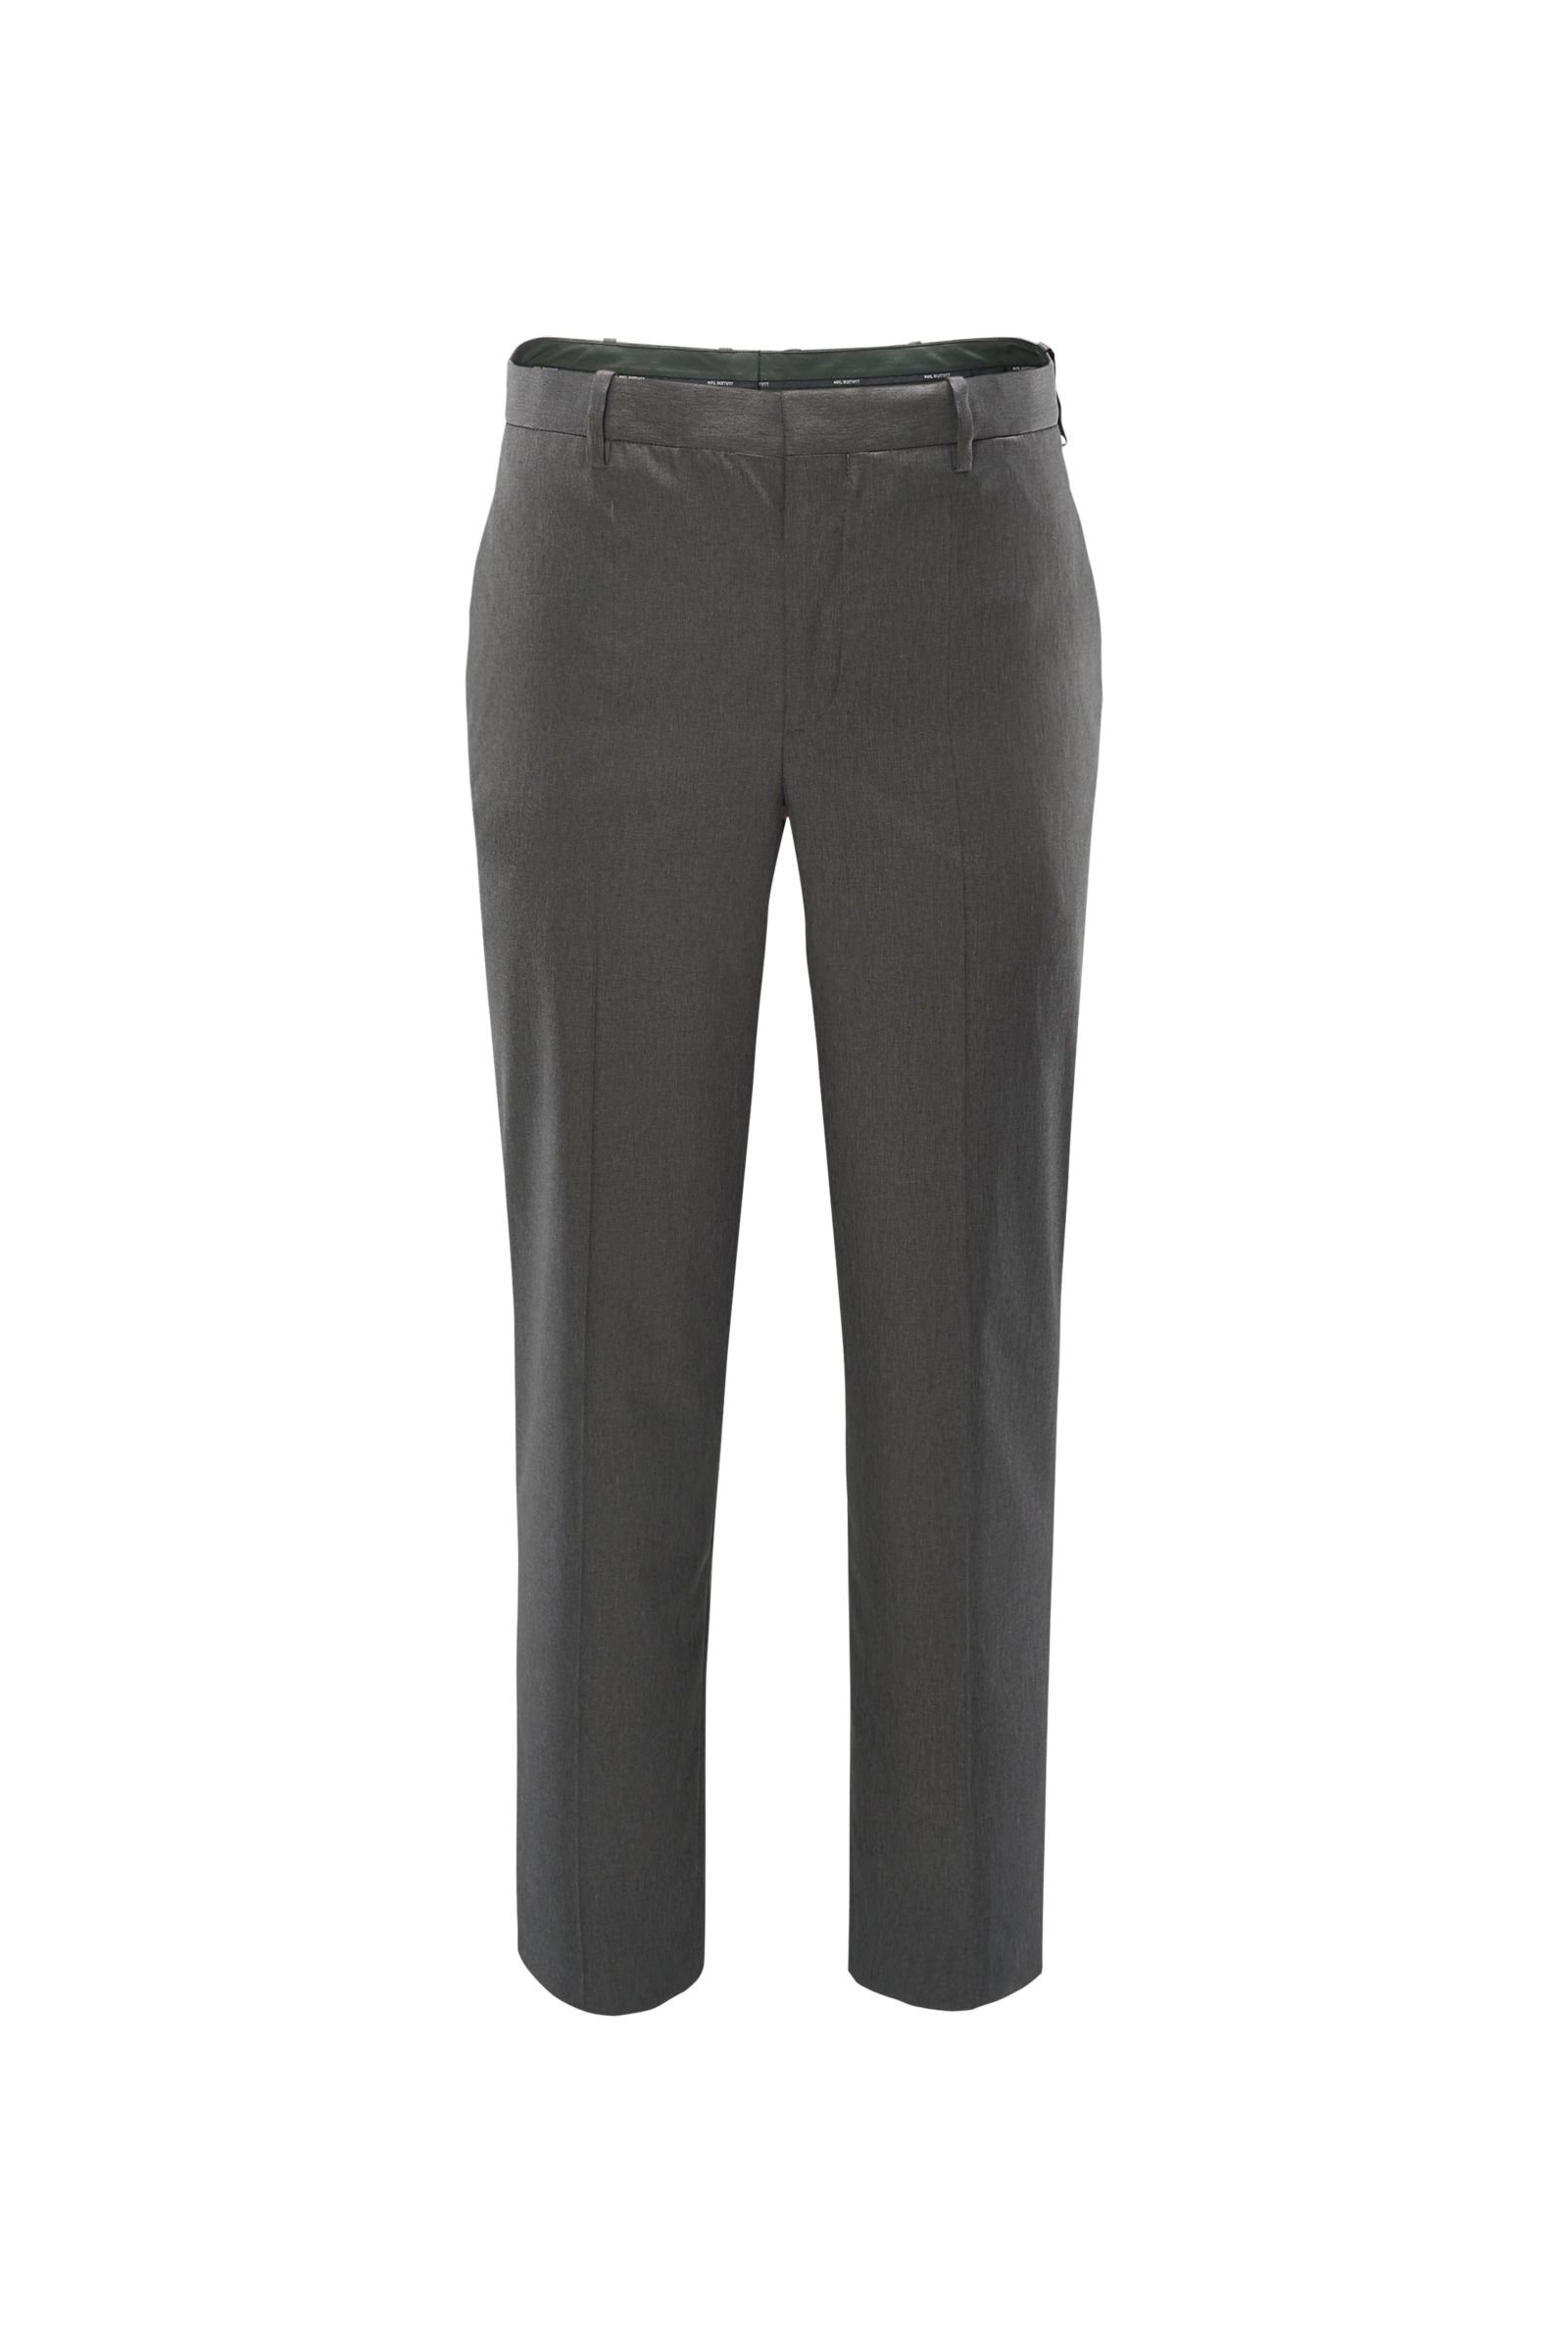 Trousers grey-brown